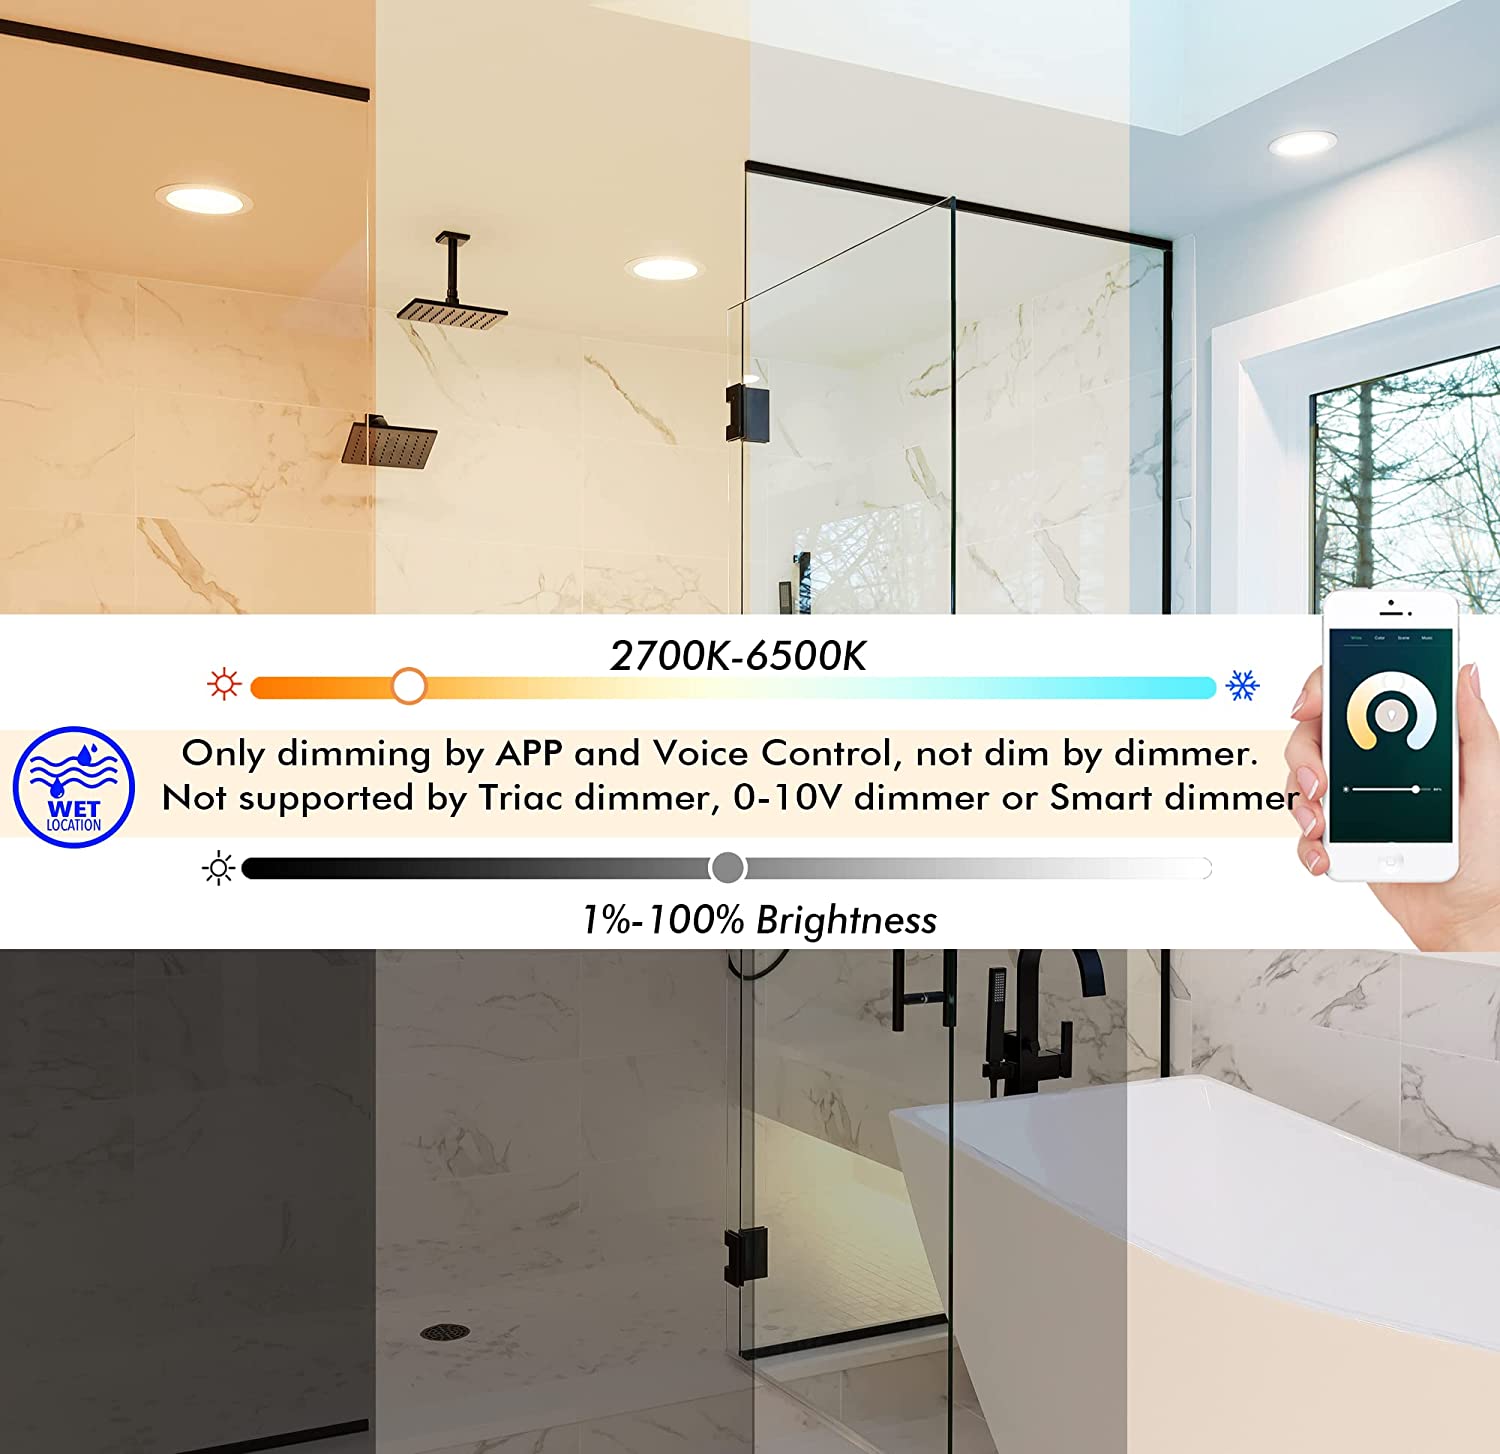 Smart Wifi Ultra Thin LED Recessed Light with Junction Box, 3 Inch,RGB CW Color Changing, Compatible with Alexa and Google Home Assistant, 2700K-6500K, CRI90+, Type IC, WET Location